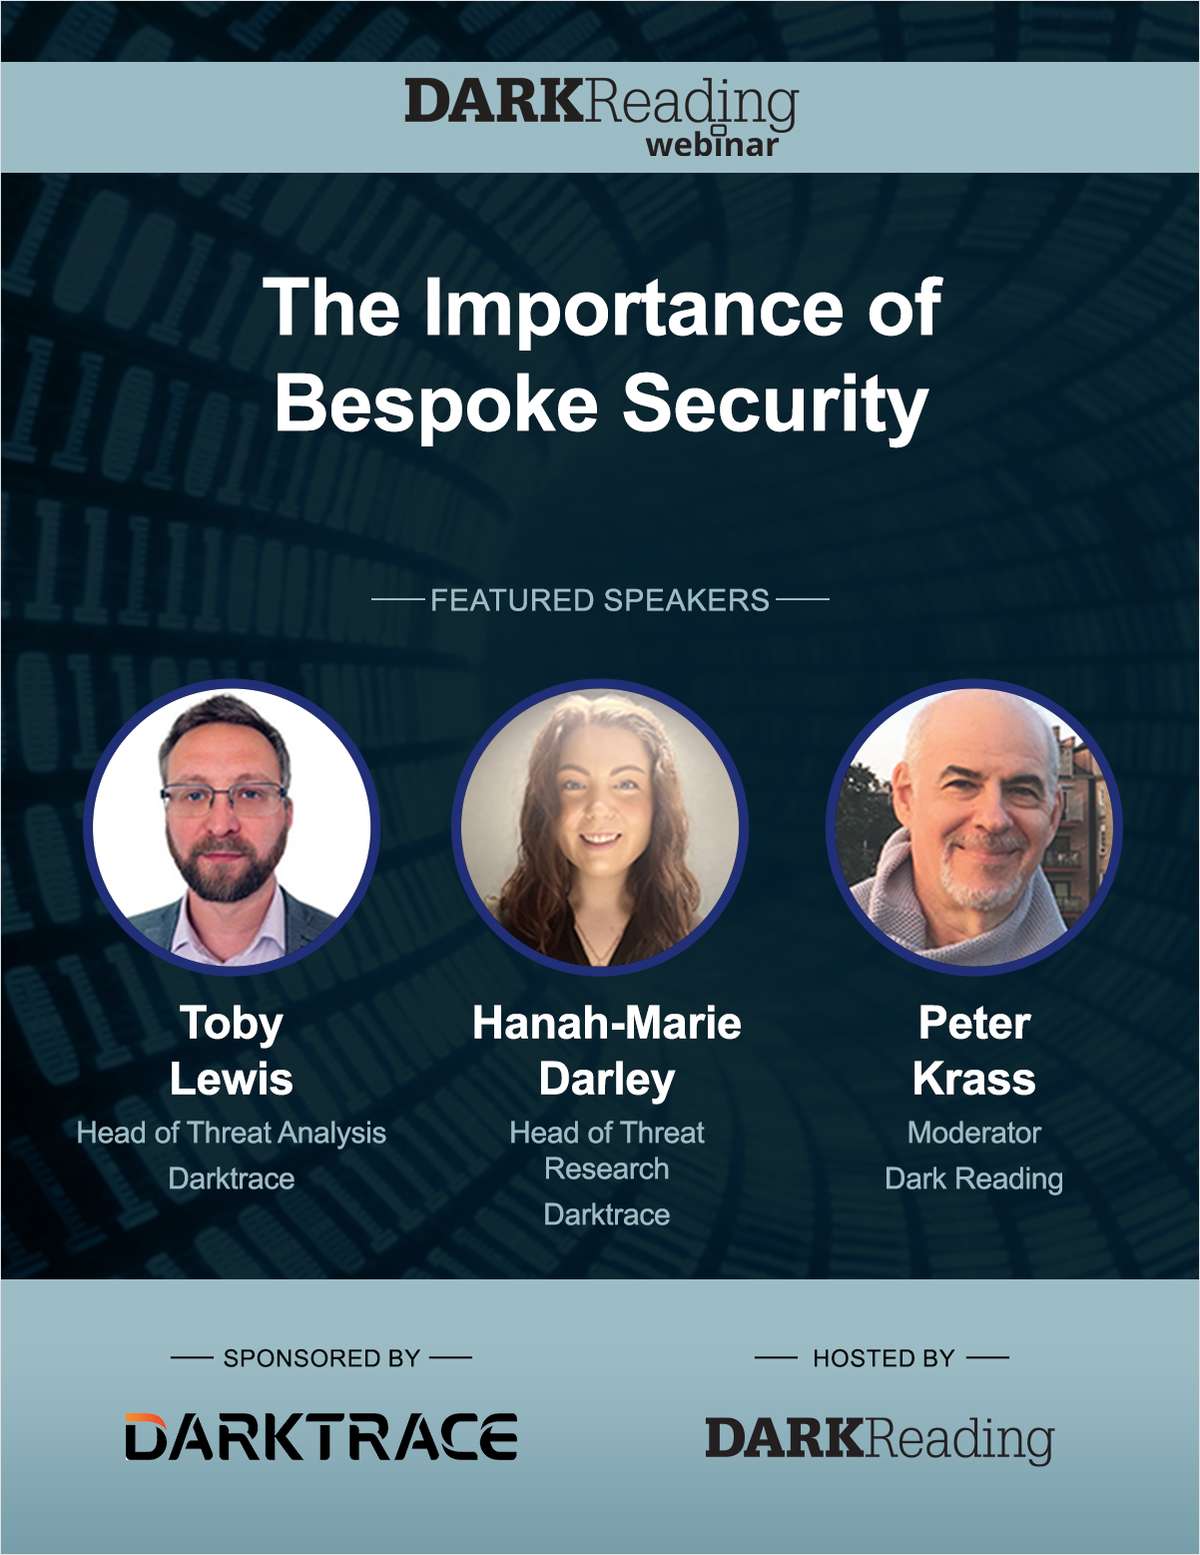 The Importance of Bespoke Security